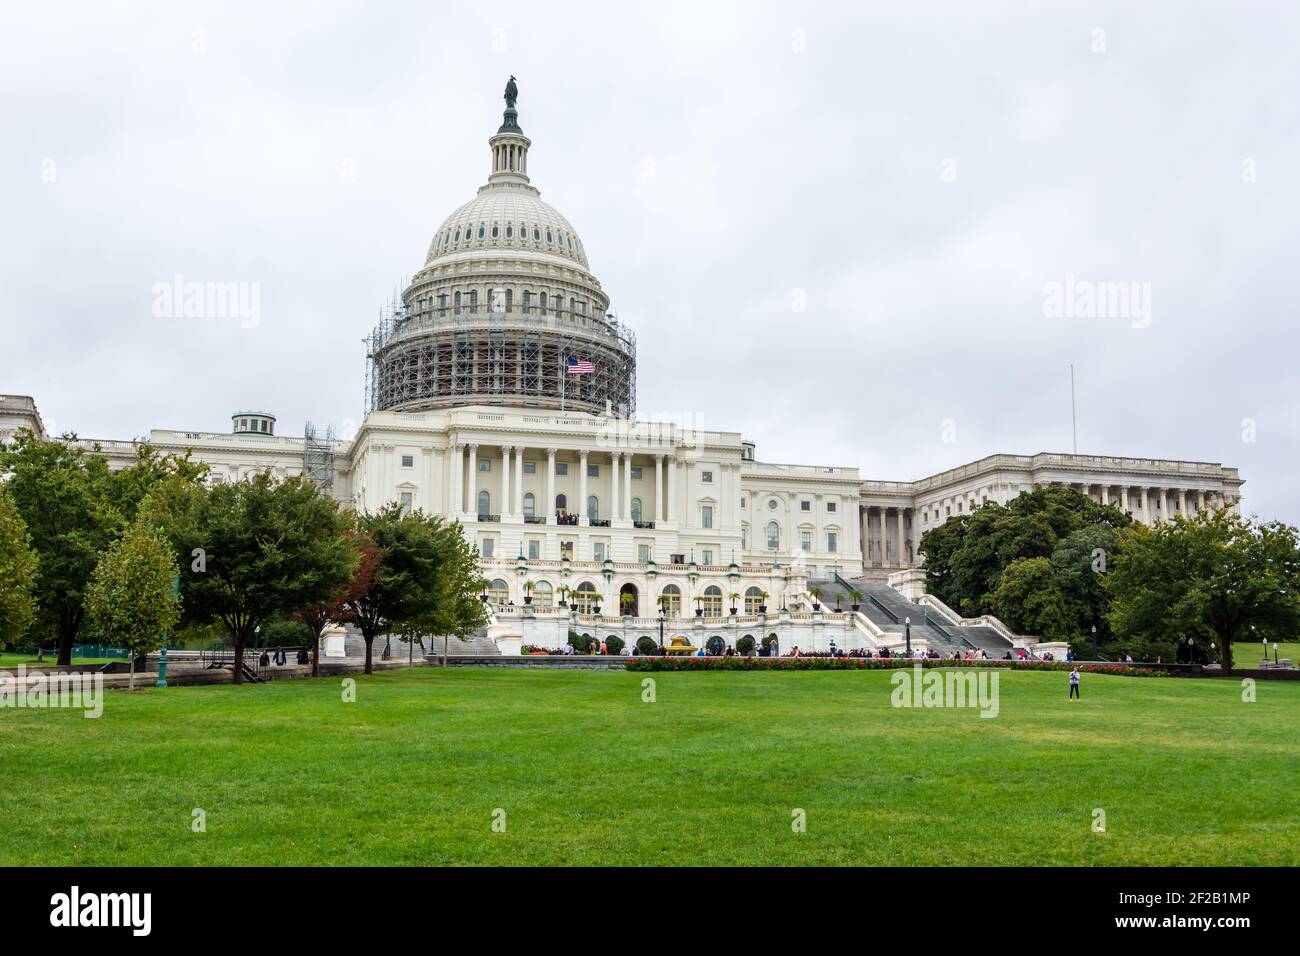 WASHINGTON, UNITED STATES - Sep 25, 2014: View of the Capitol in Washington under a cloudy sky. The Capitol is the seat of the Senate as well as a mus Stock Photo